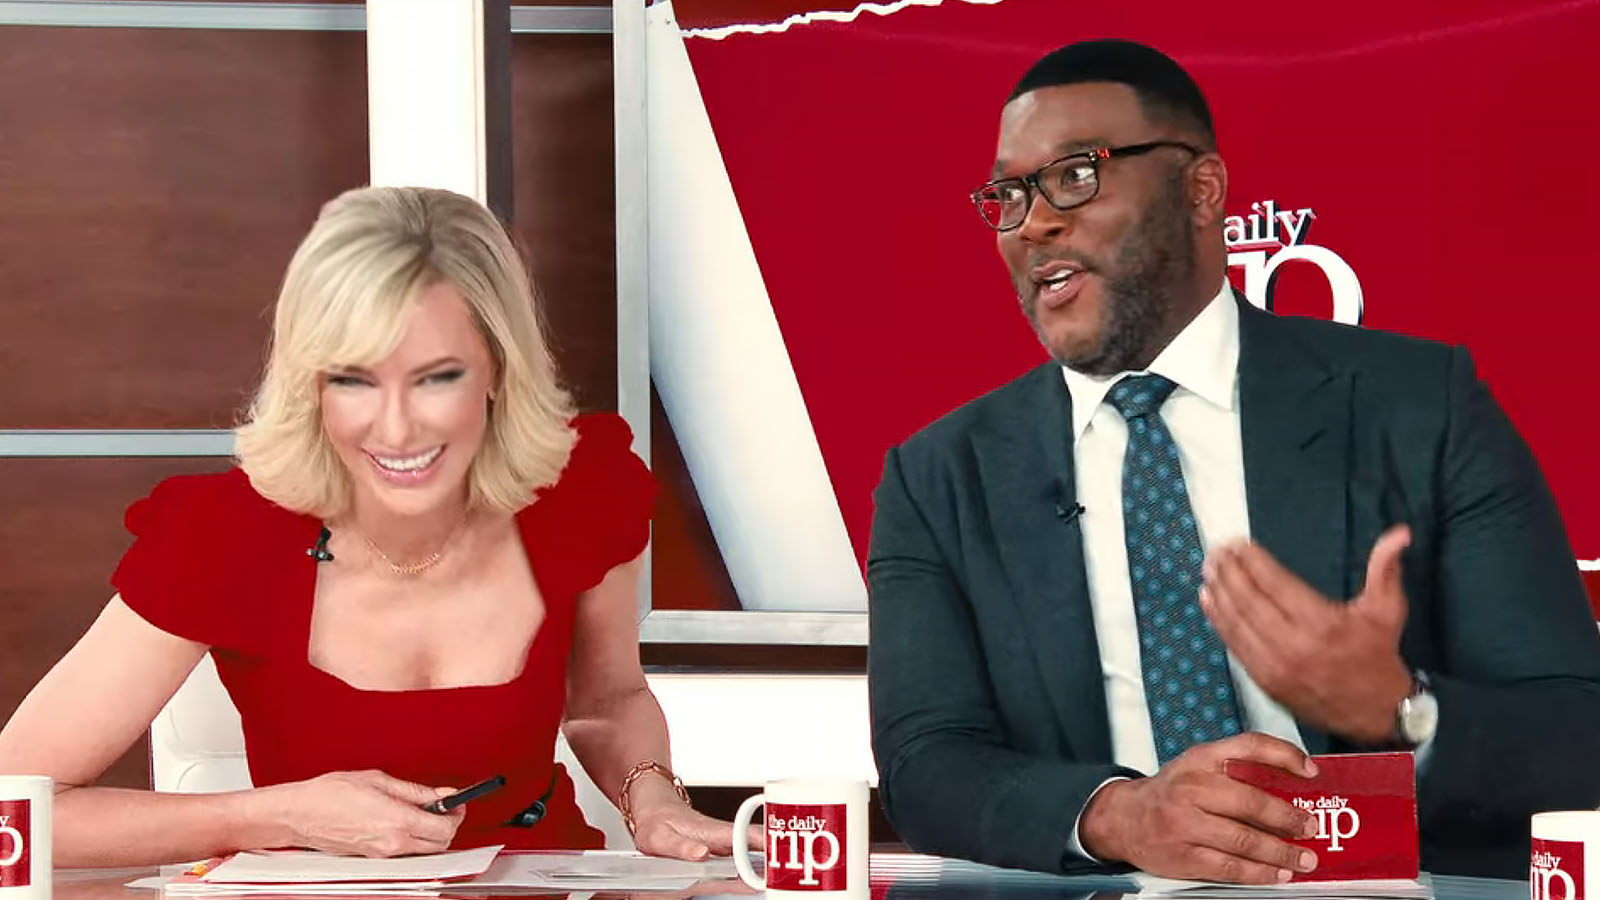 The Daily Rip’s anchors (Cate Blanchett and Tyler Perry) react to the bad news. Image © Netflix